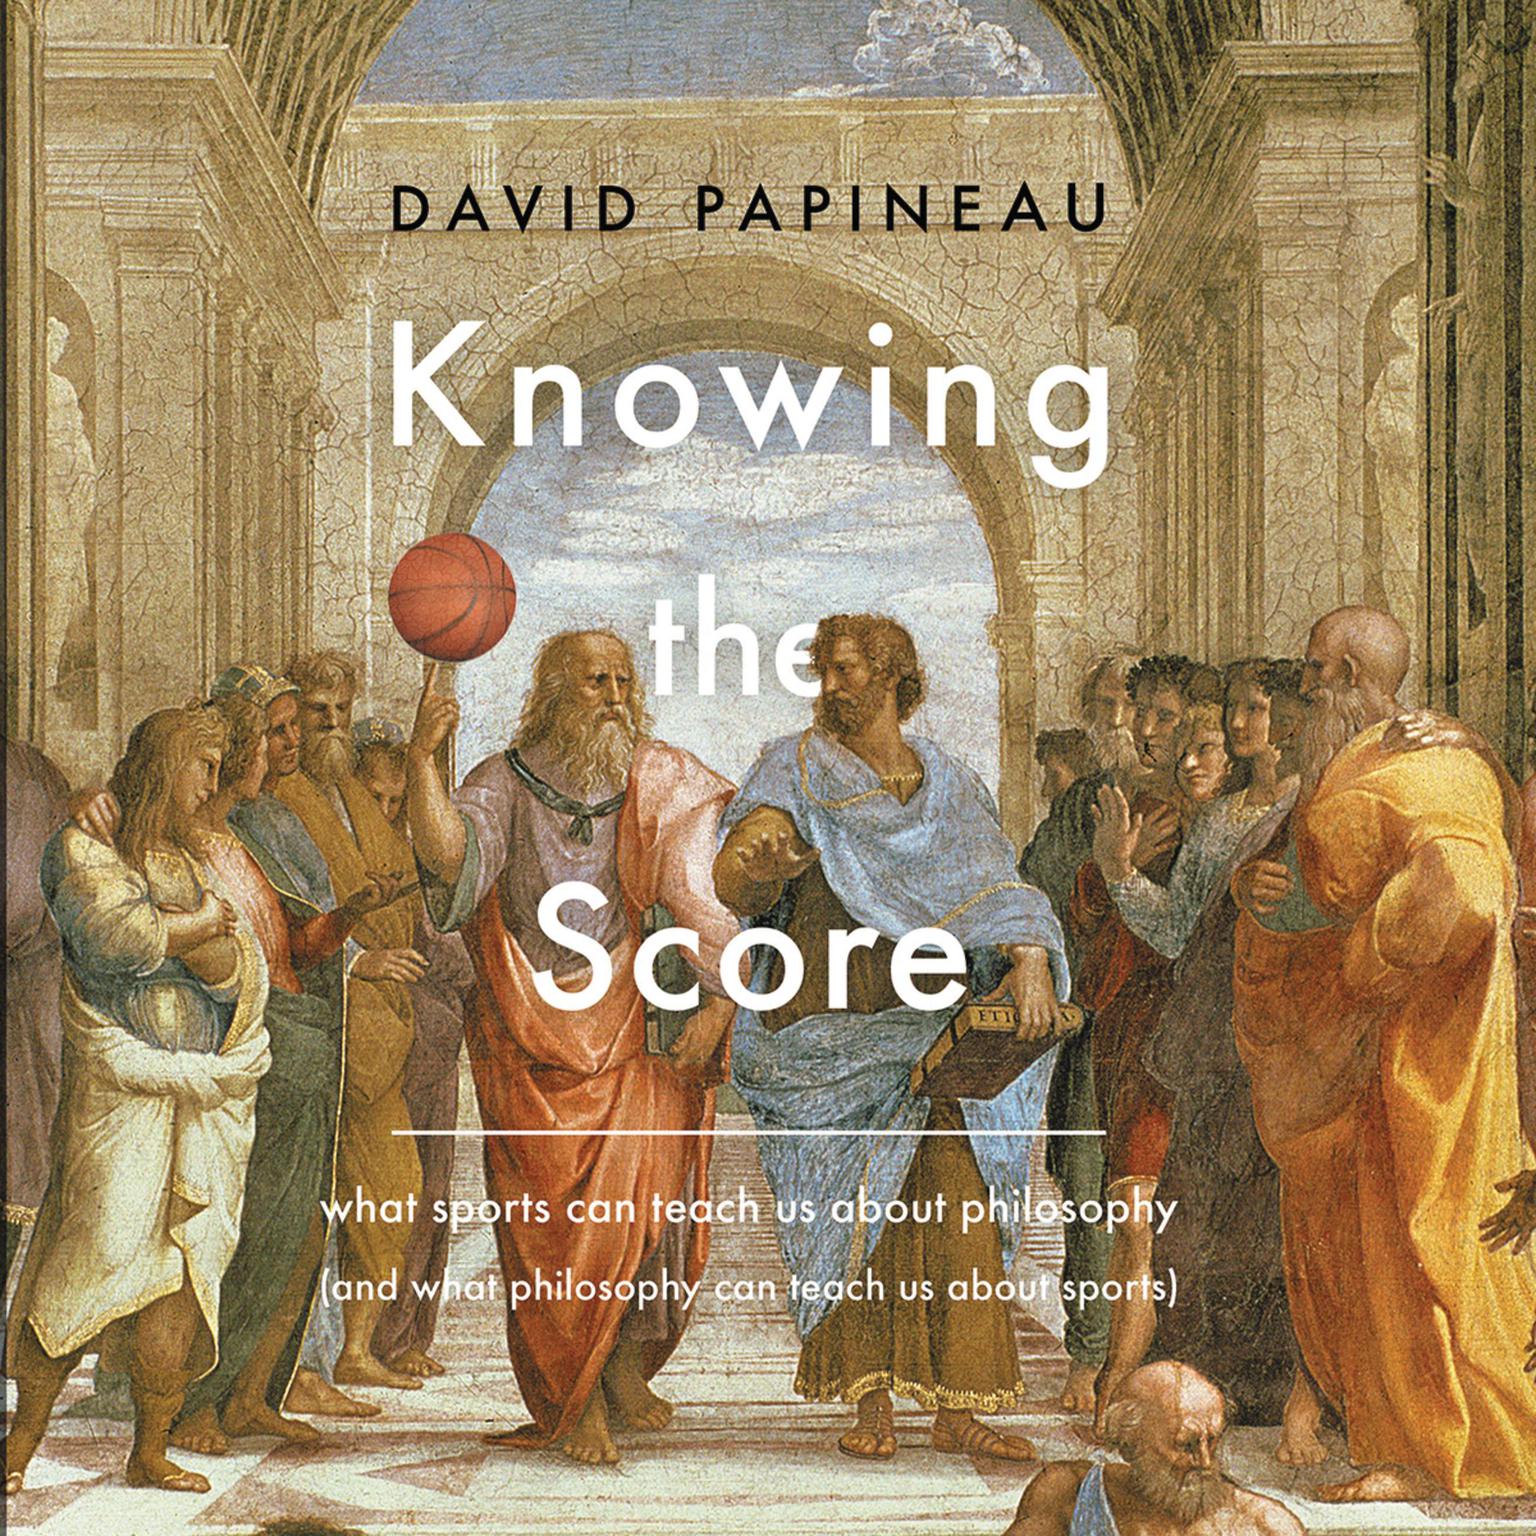 Knowing the Score: What Sports Can Teach Us About Philosophy (And What Philosophy Can Teach Us About Sports) Audiobook, by David Papineau